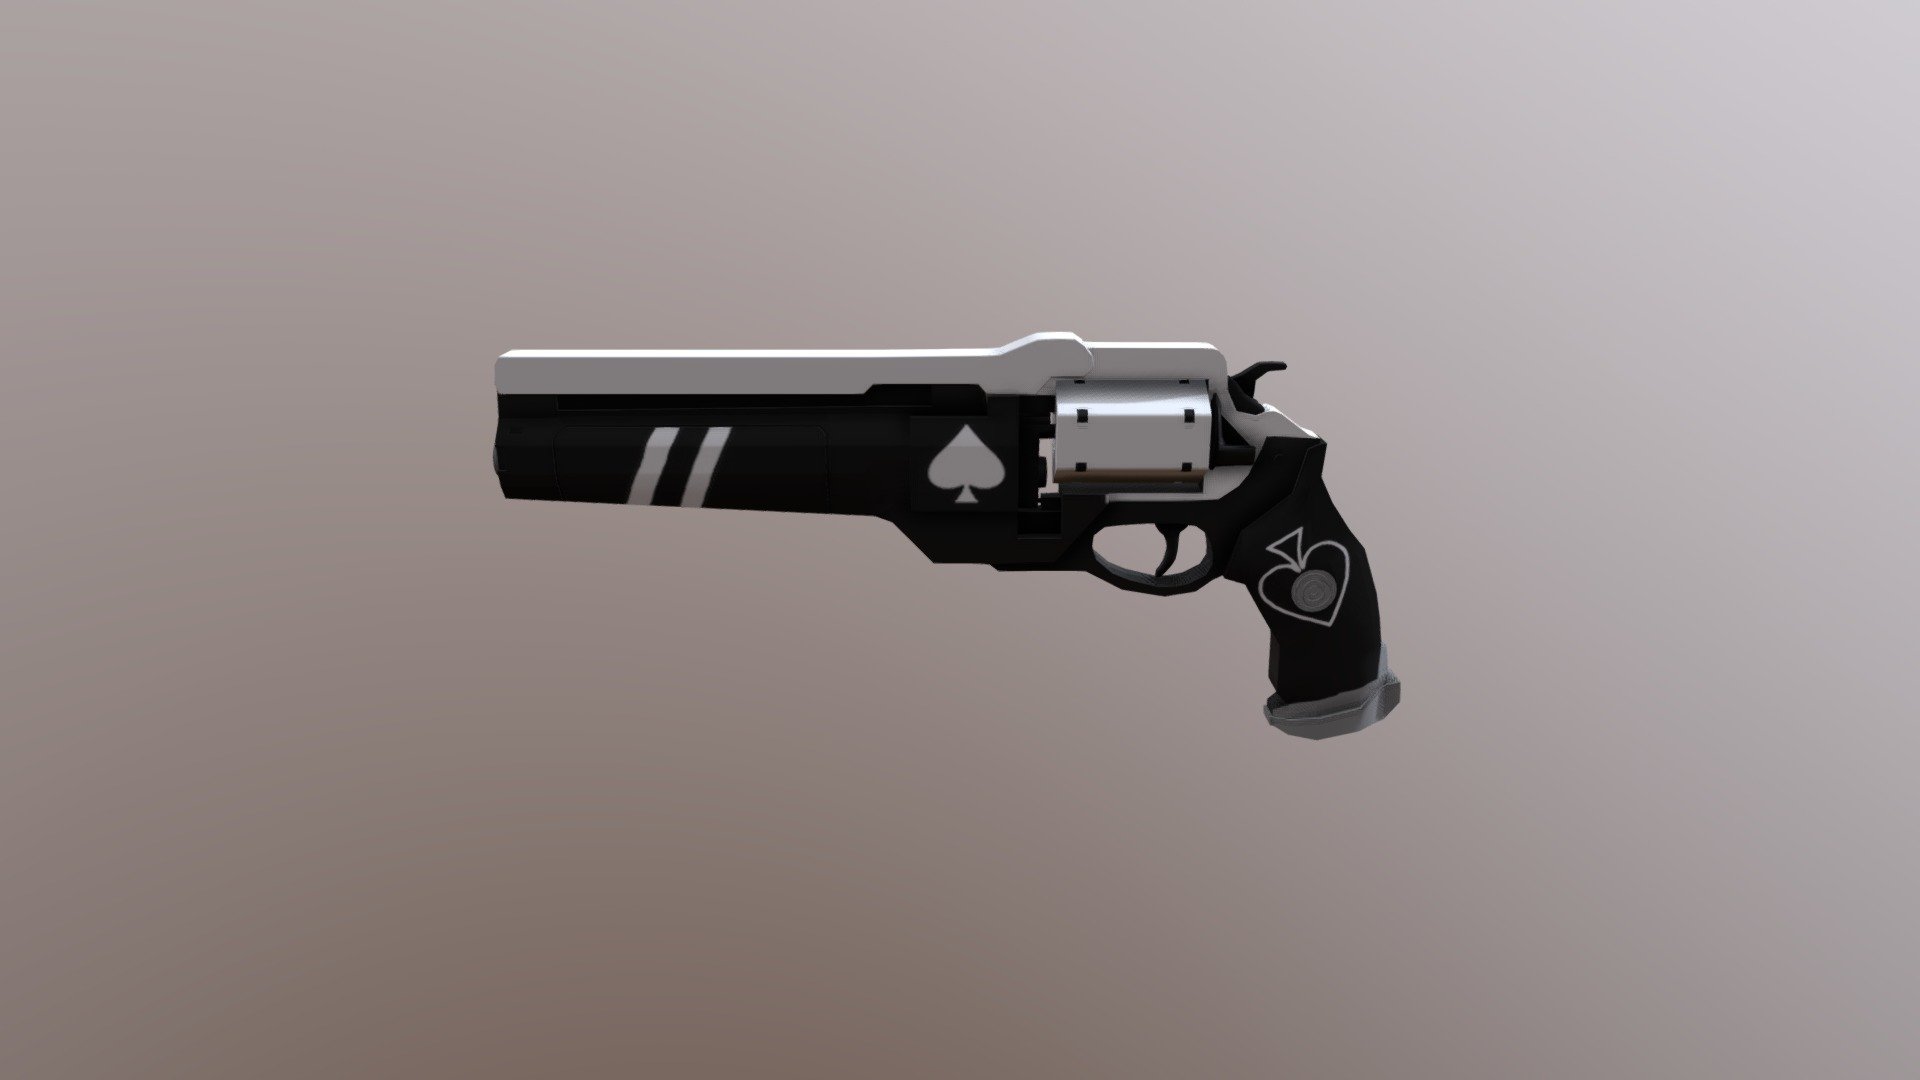 Ace of spades Handcannon from Destiny 2 - Ace Of Spades 2 - D...